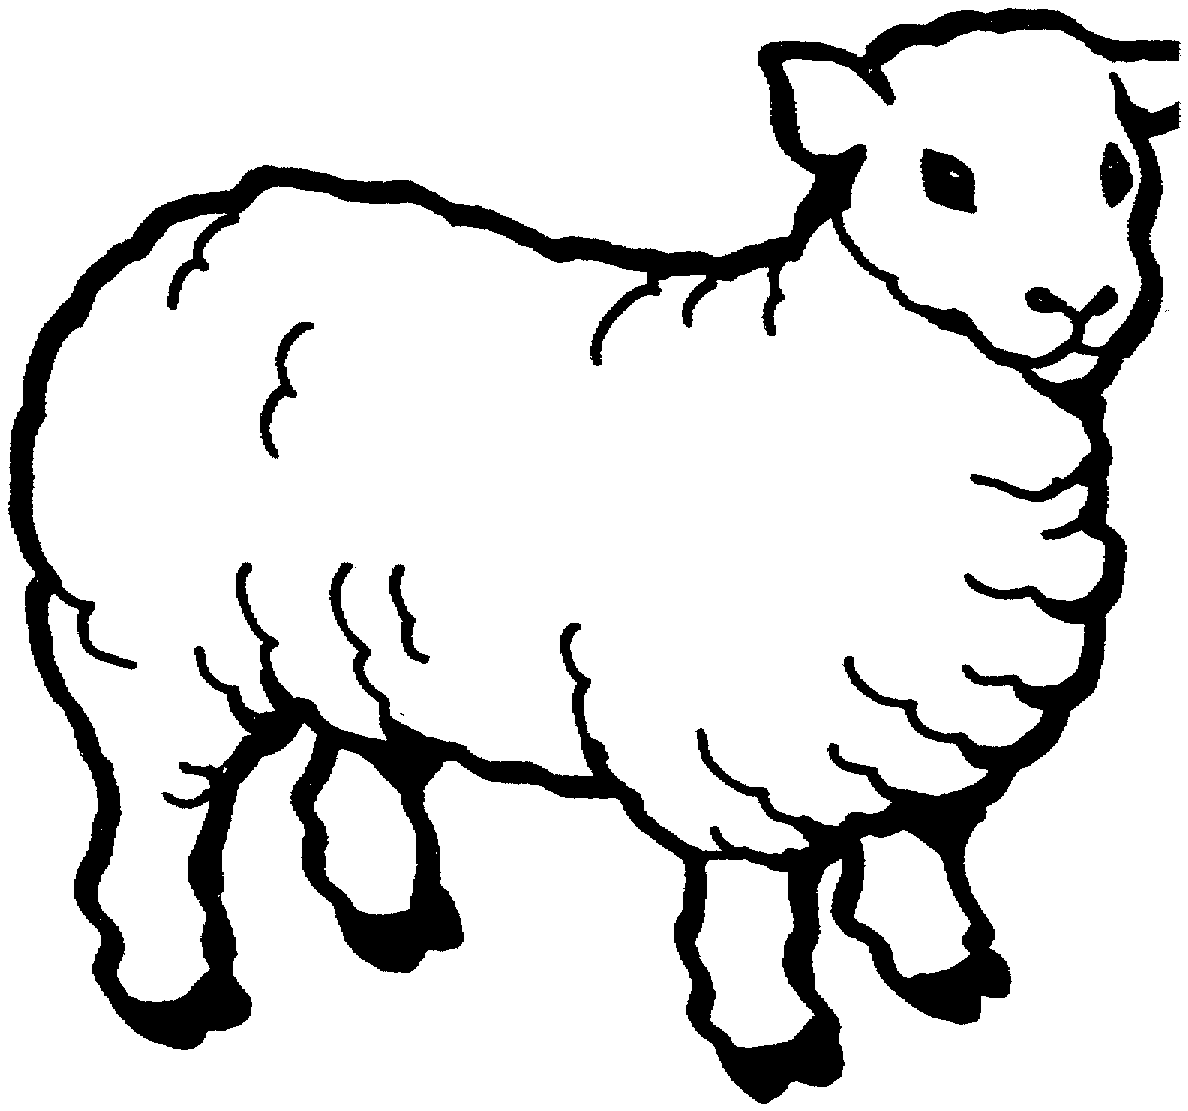 Free Sheep Outline, Download Free Sheep Outline png images, Free